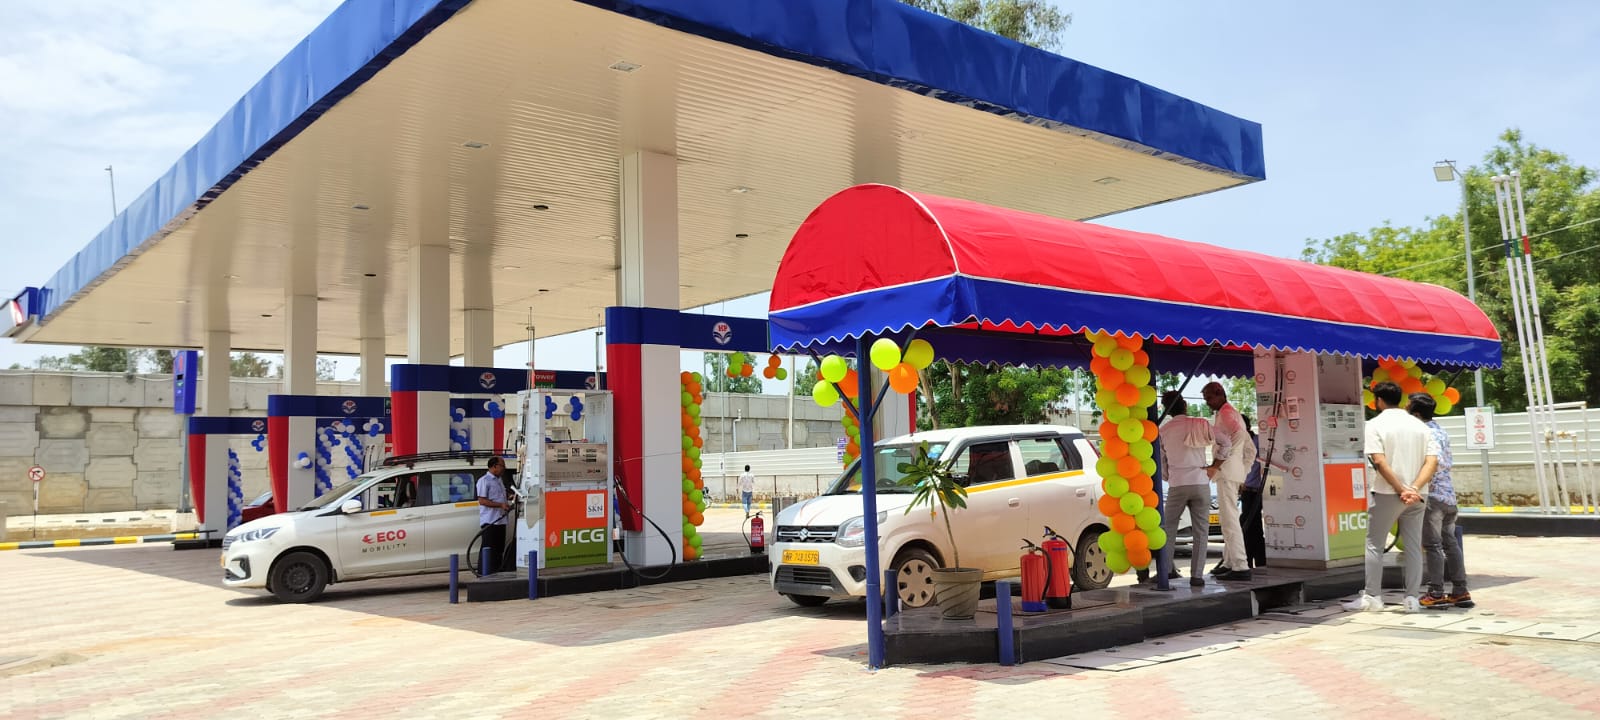 We, M/s  SKN .HARYANA CITY GAS is excited to announce the commissioning  And inauguration of our CNG Station, M/s Janak Filling Station ( HPCL) is  Located strategically at NH248A, Gurugram , Sohna Road, Alipur in the  Geographically area of Gurugram.  The CNG Station will play a pivotal role in the development of CNG Eco System in sohna in addition to providing relief to people in its vicinity from  Long queue on the existing CNG Station.  This is the next step taken by SKN .HCGDPL for making sohna city Greener and Cleaner bringing all the benefits of cleaner fuel to resident sohna city. 